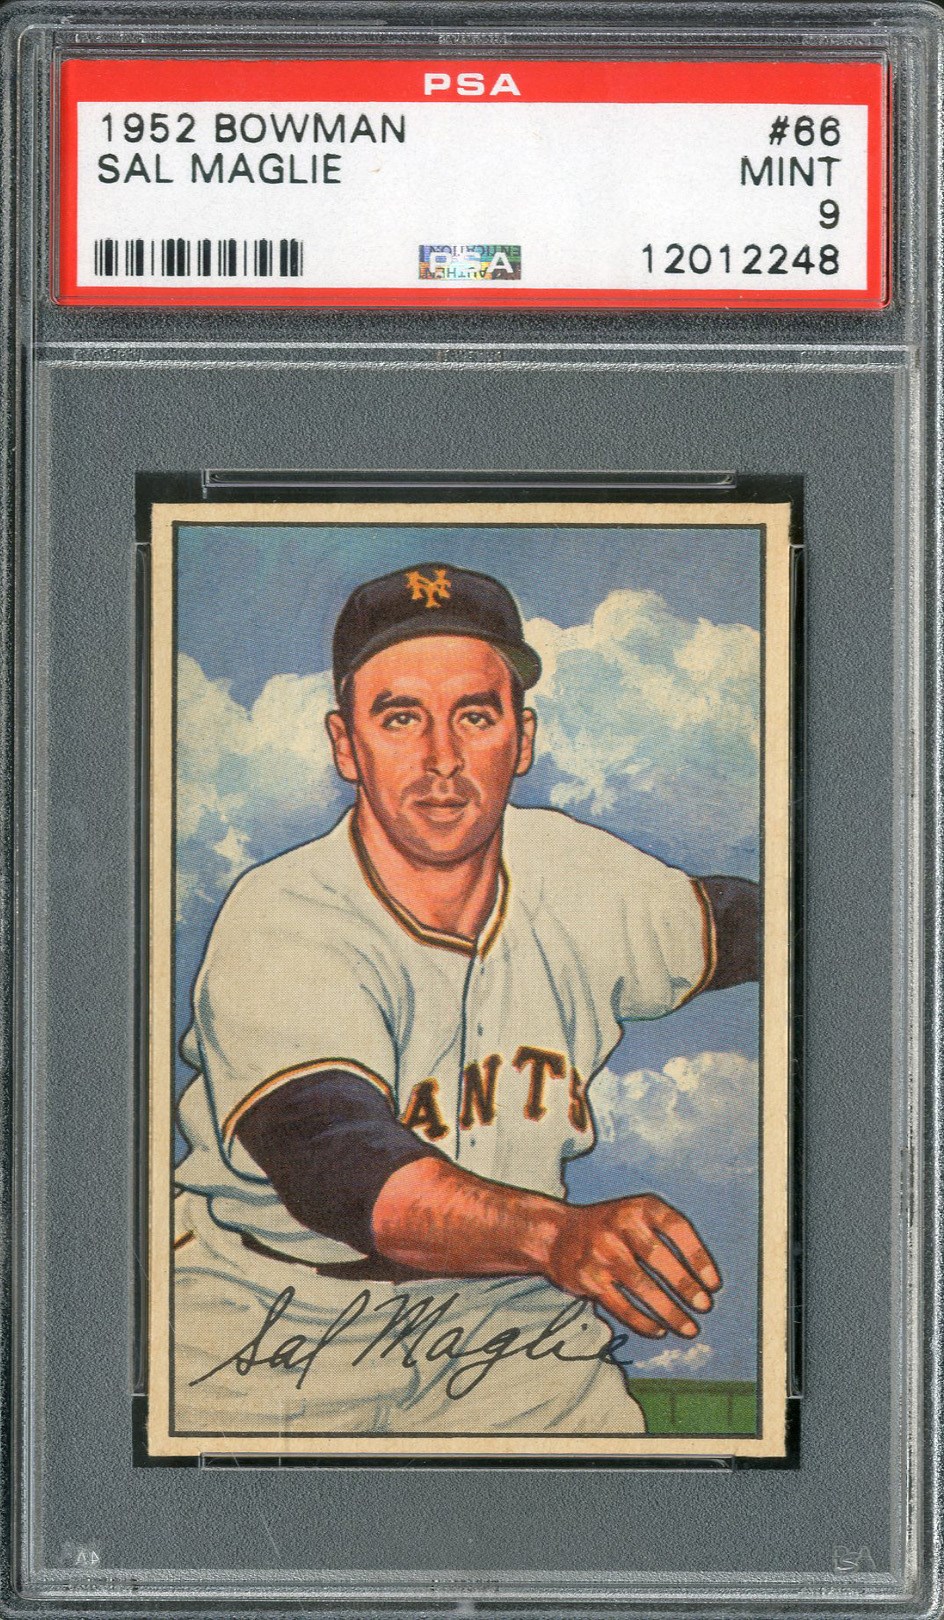 Baseball and Trading Cards - 1952 Bowman #66 Sal Maglie PSA MINT 9